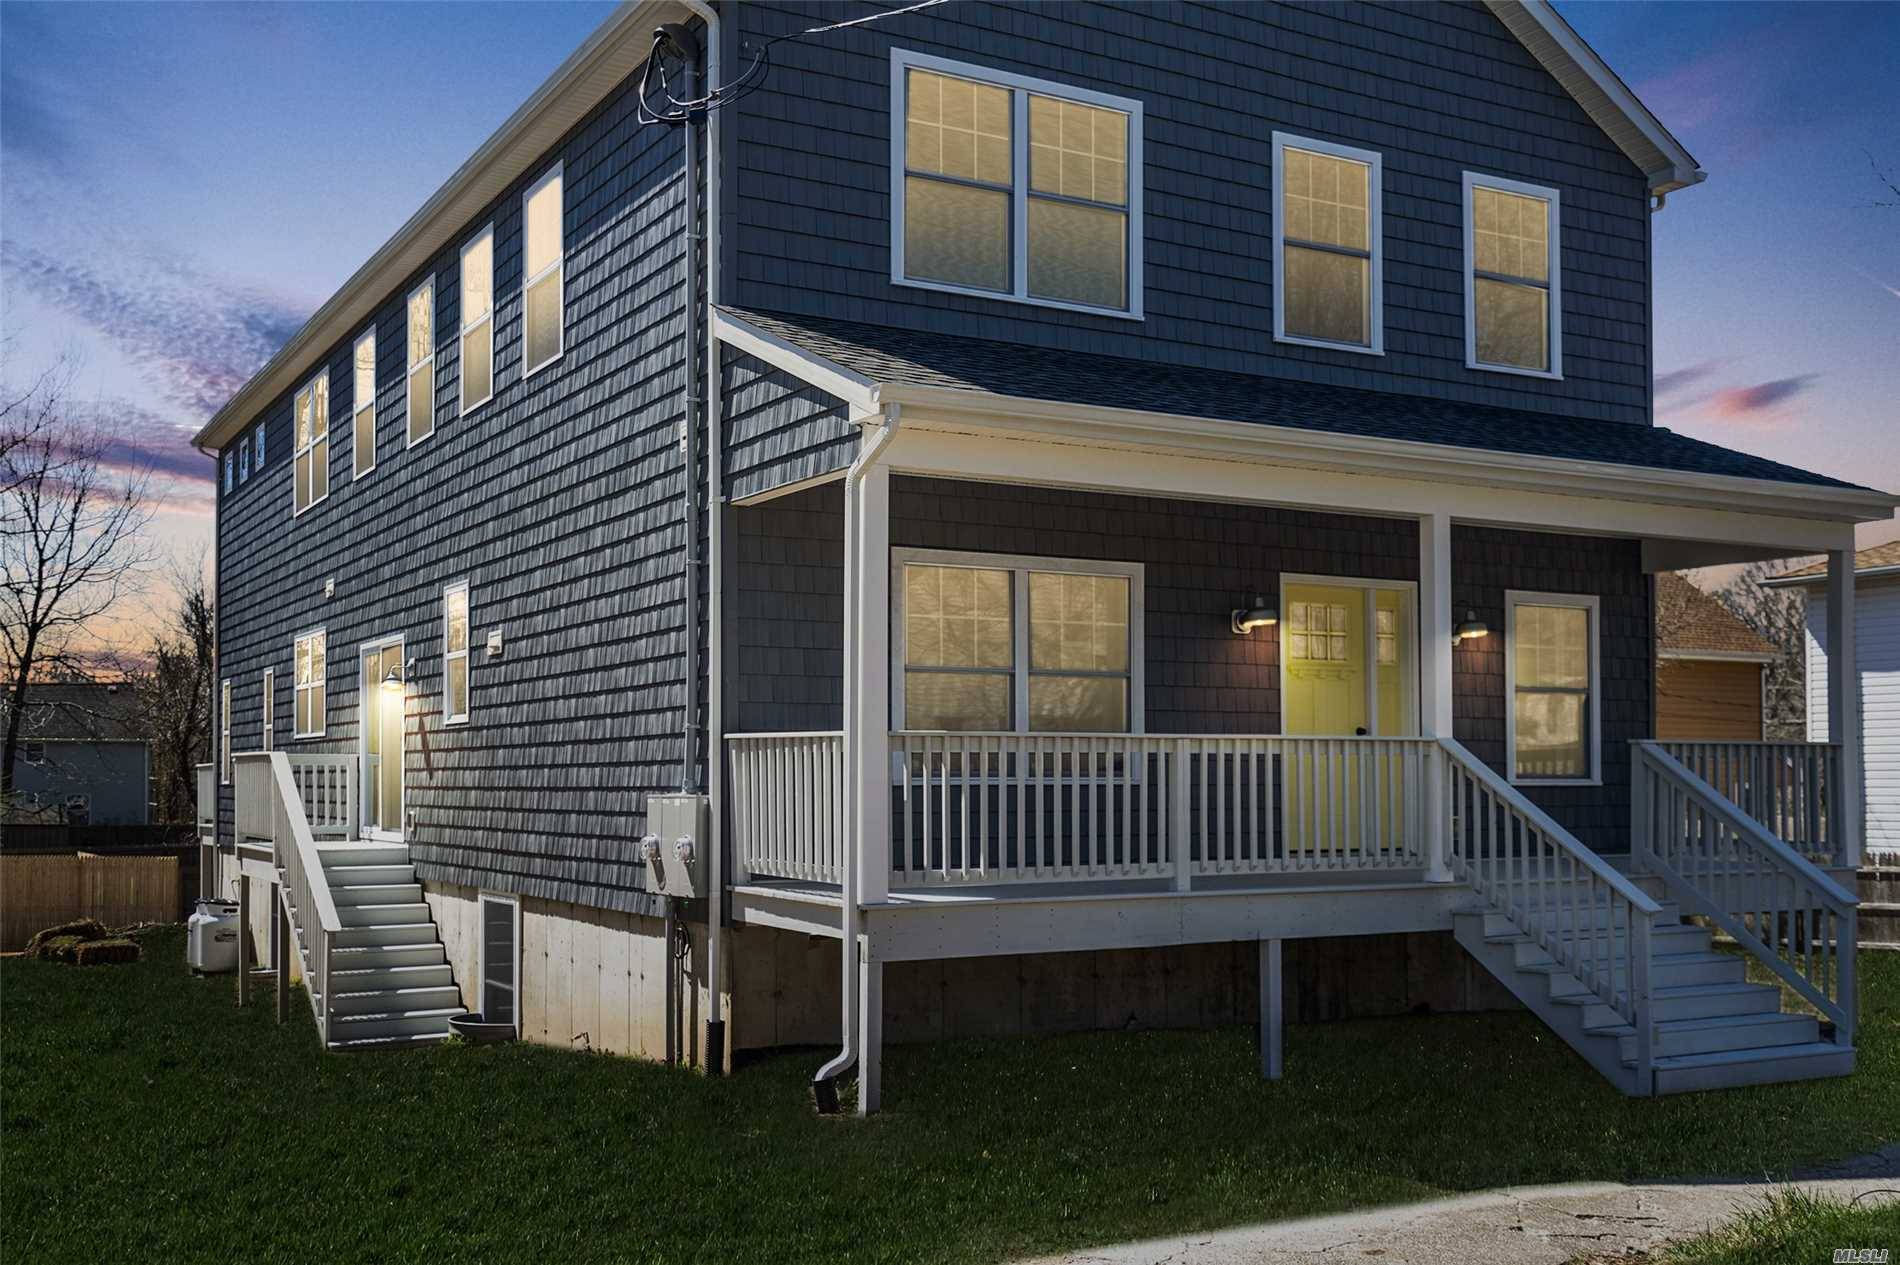 Greenport Village All New Two Family Residence with Covered Porches.